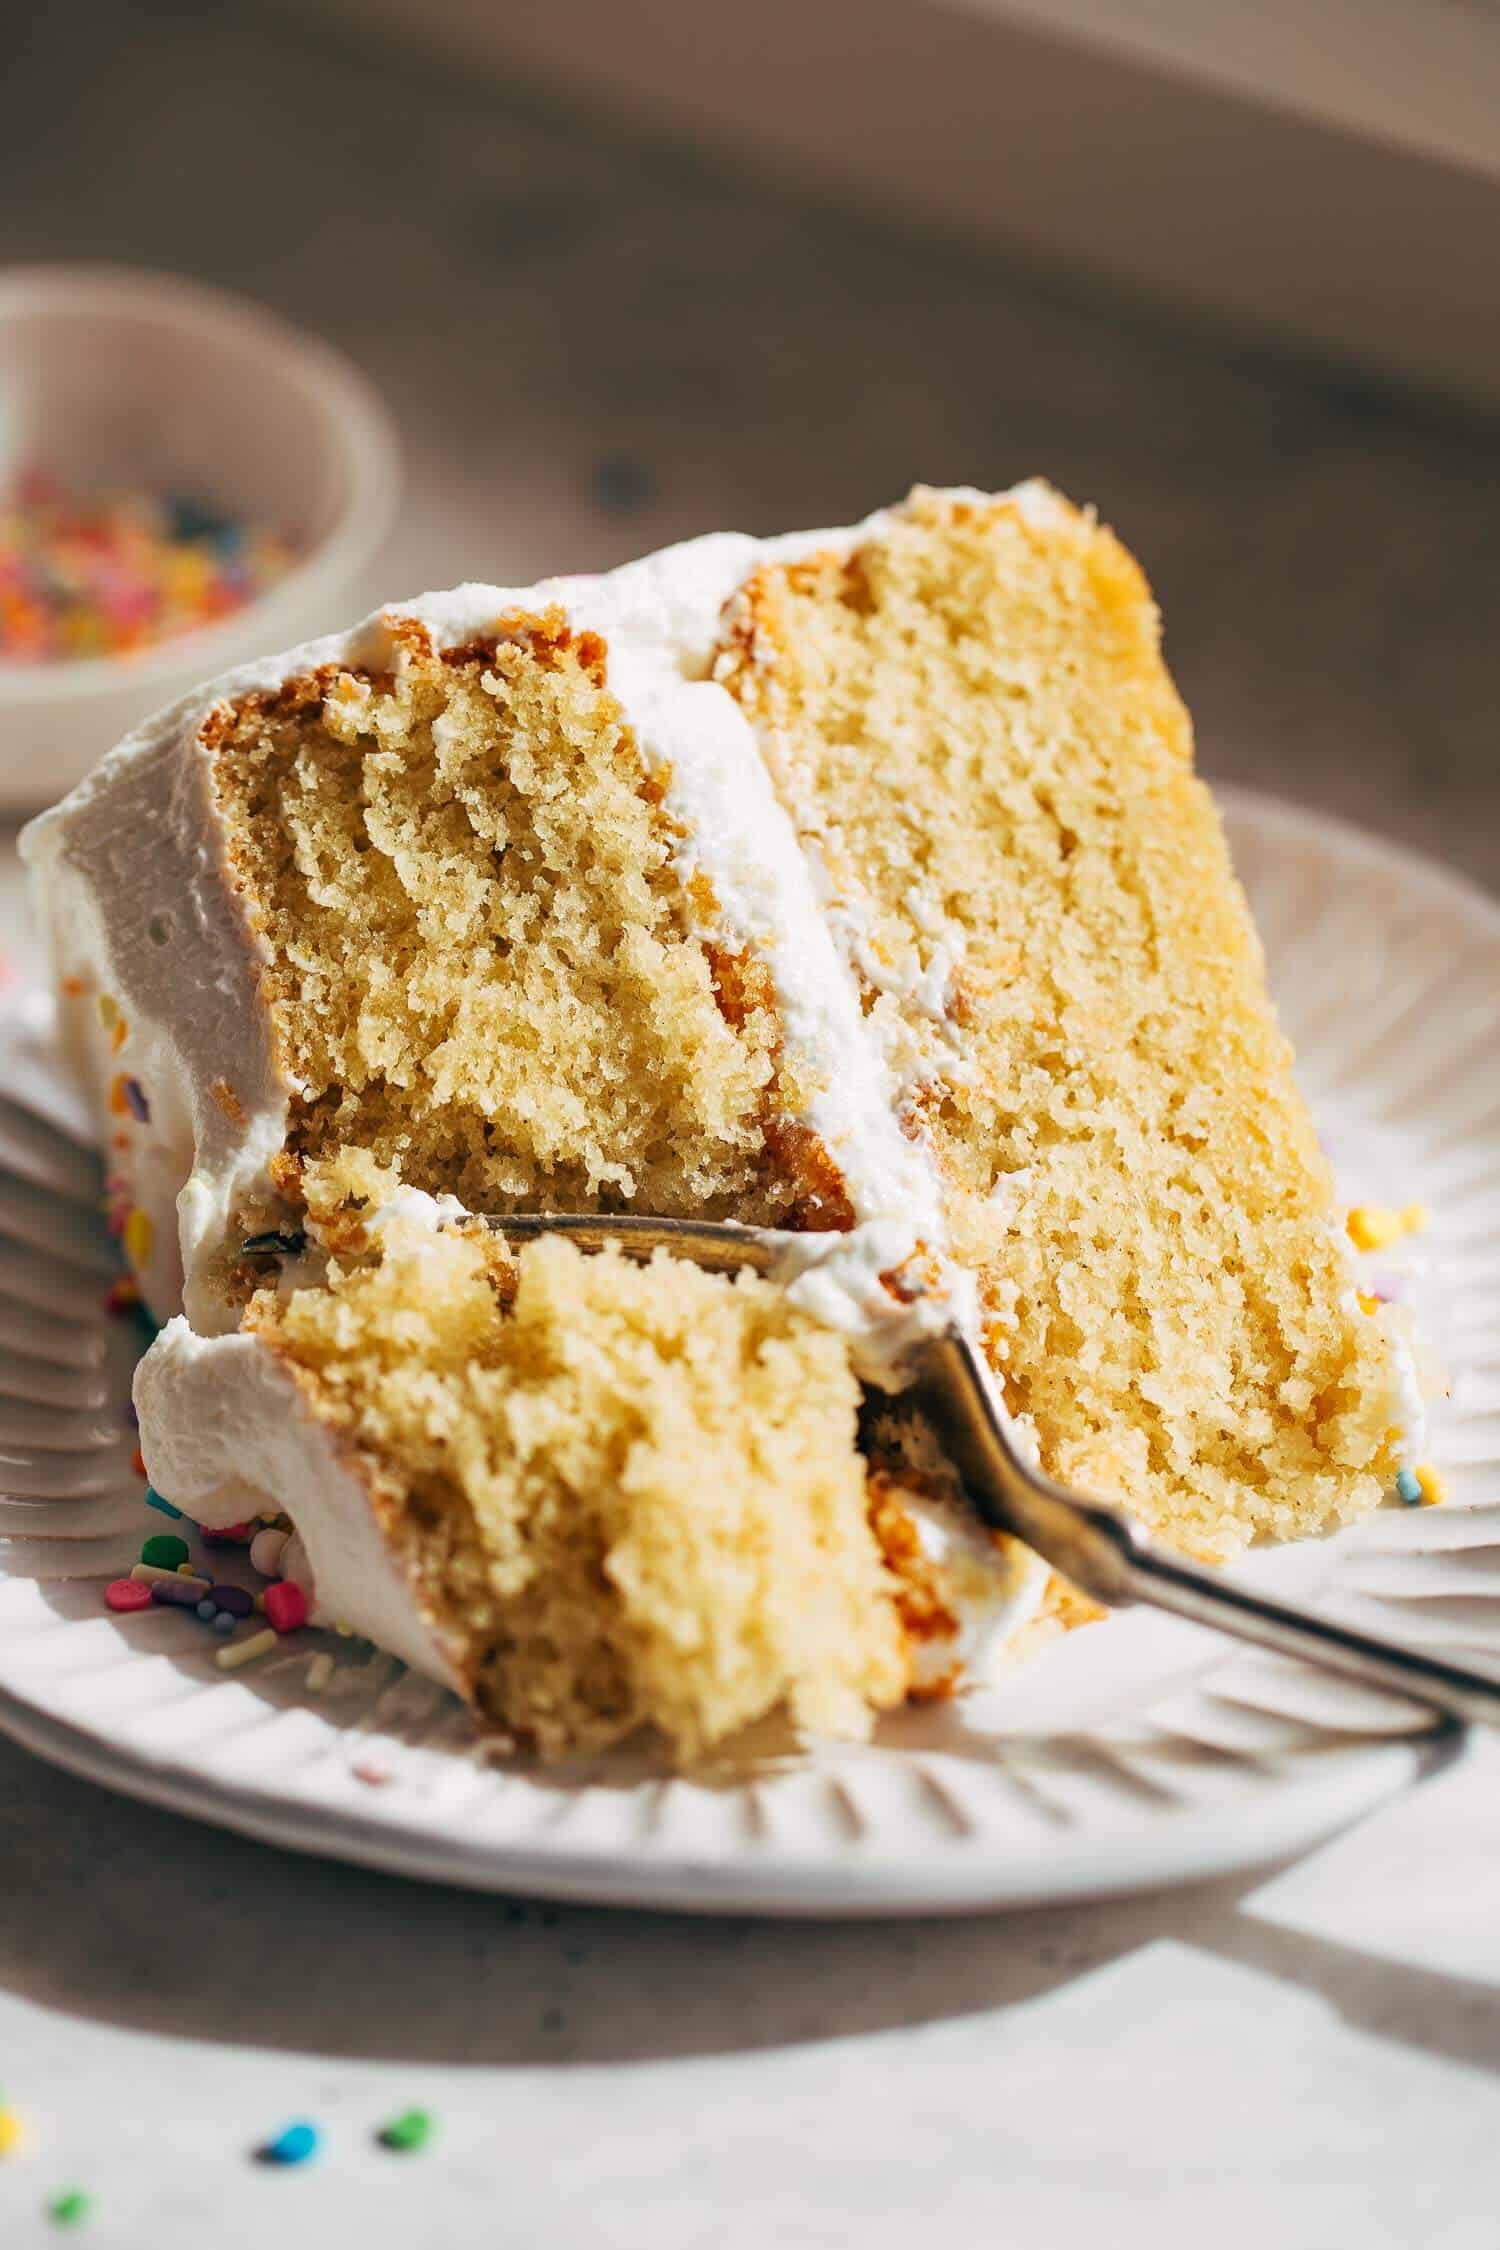 IV. Tips for Baking Perfect Gluten-free Cakes